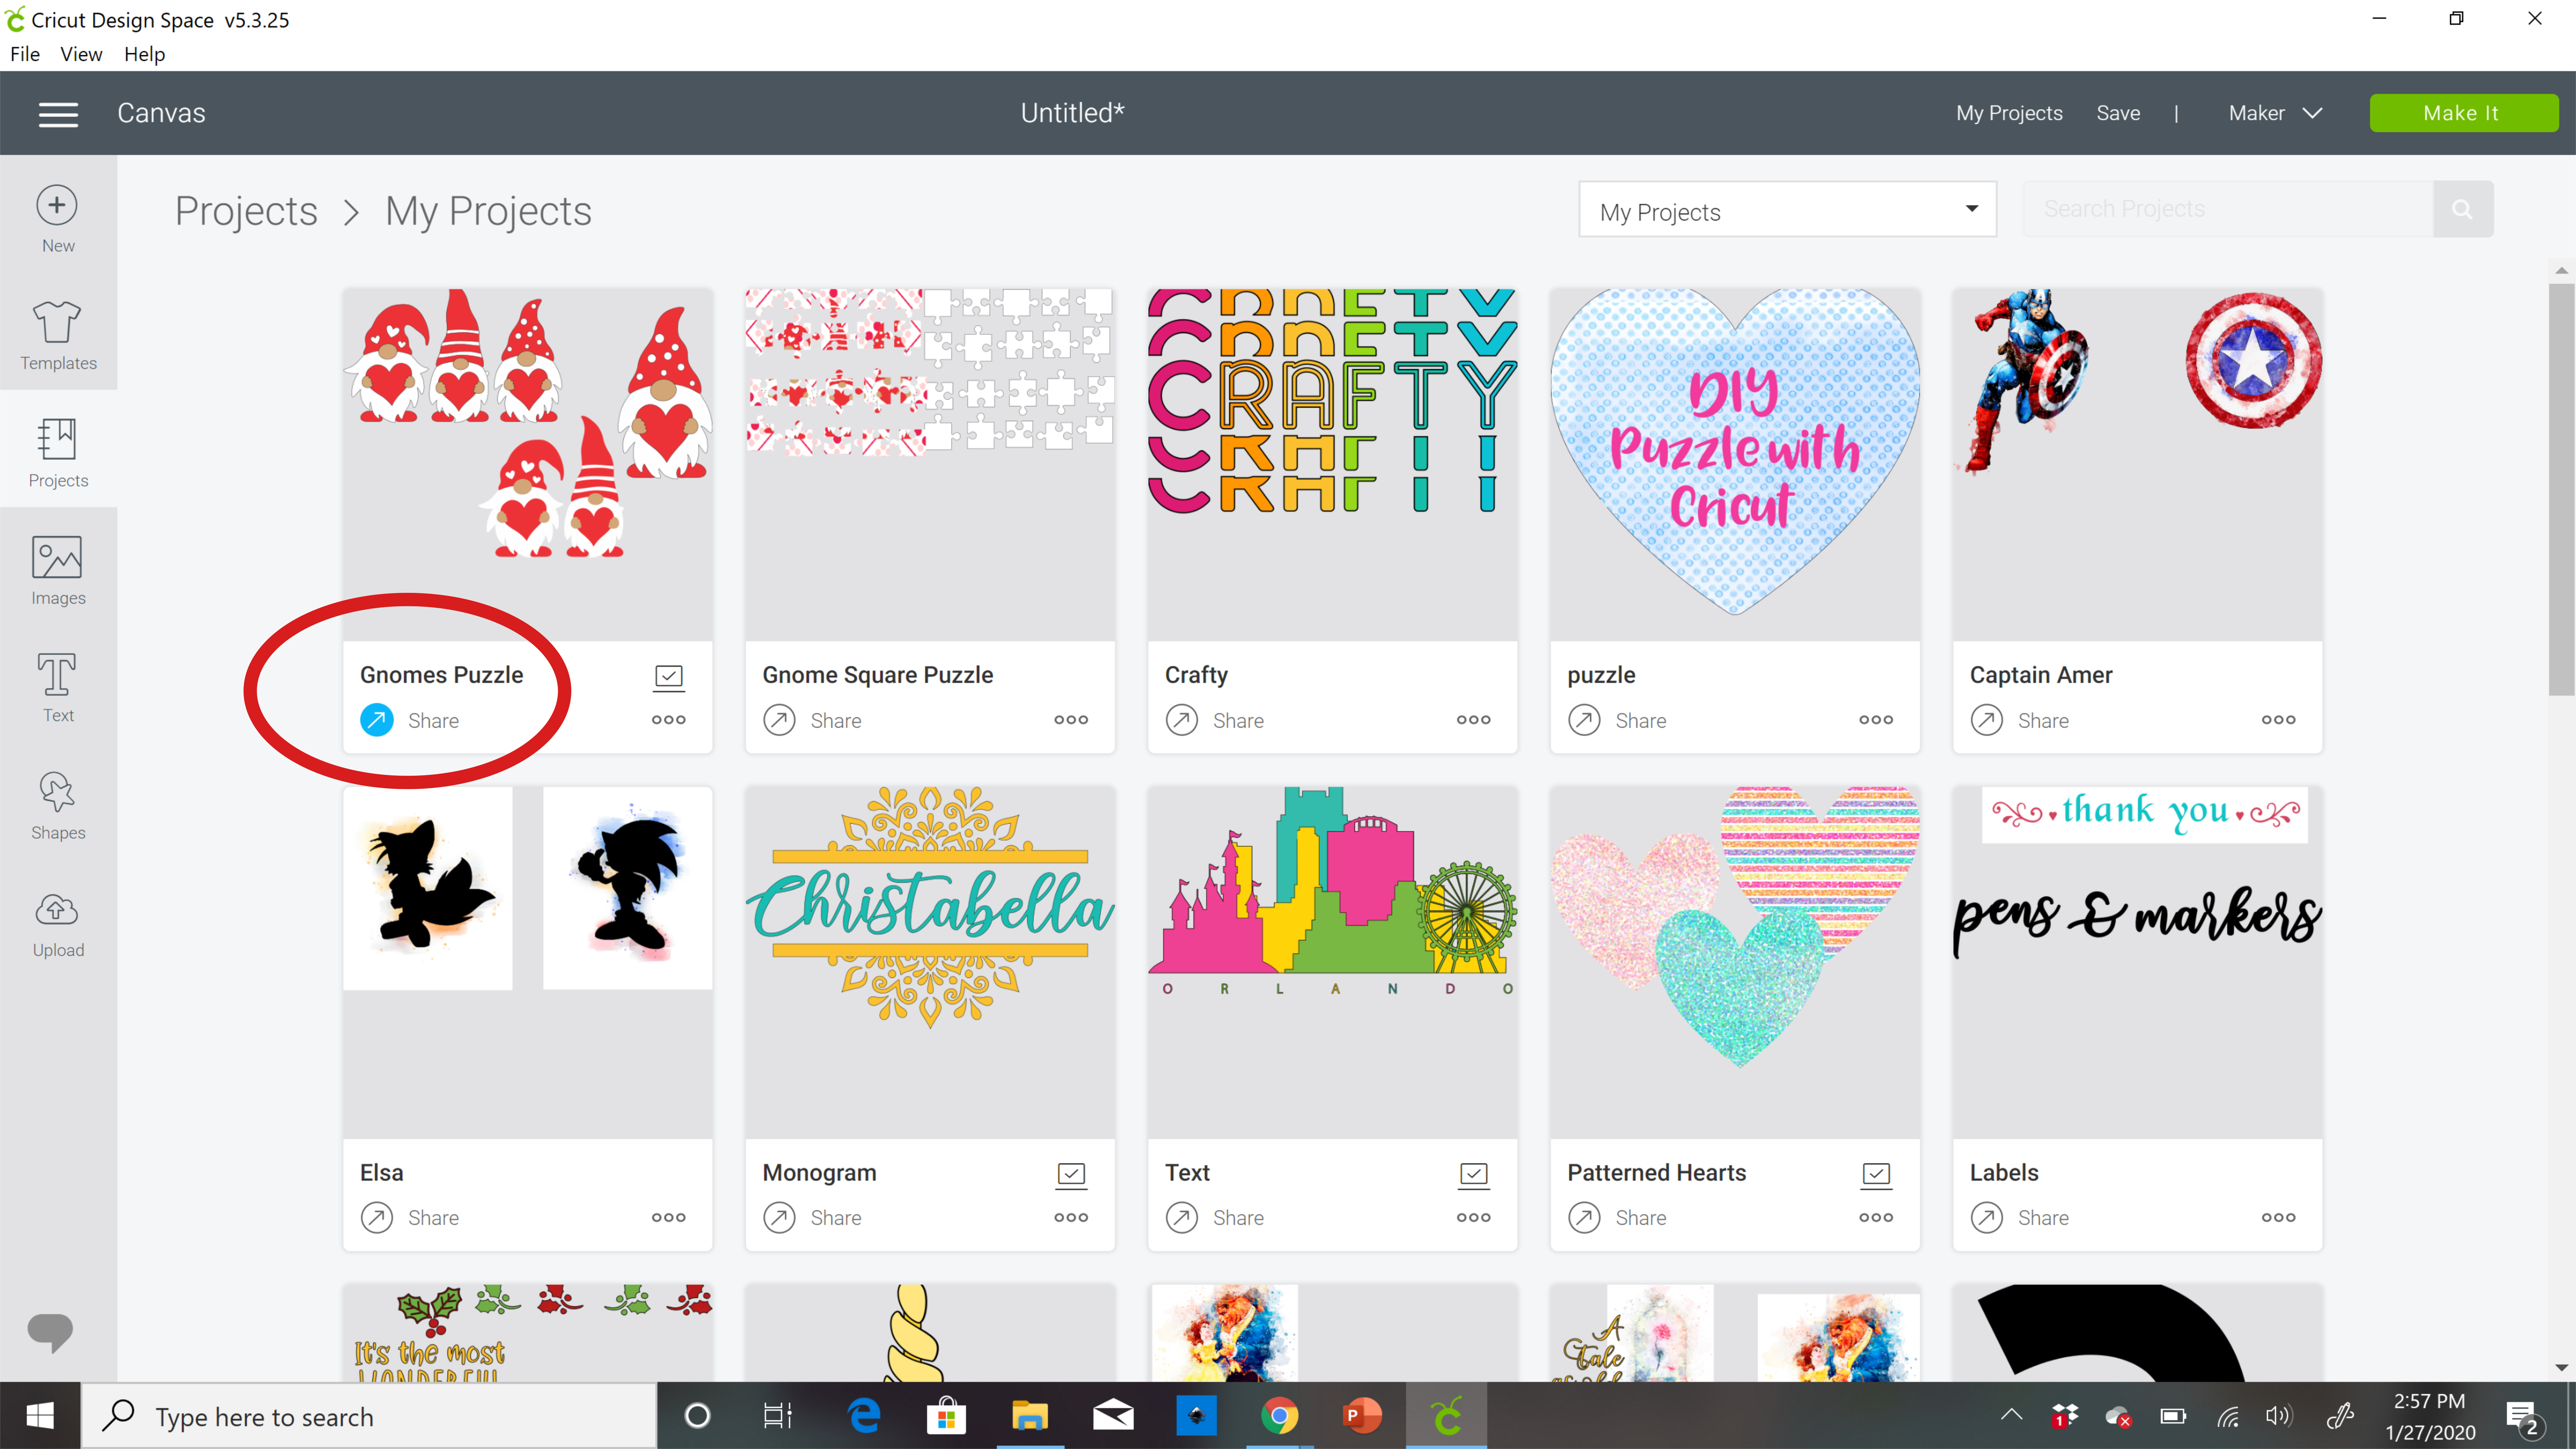 A computer screenshot of the My Projects section of Cricut Design Space. A red circle indicates where to click to share projects in the new Design Space Download.